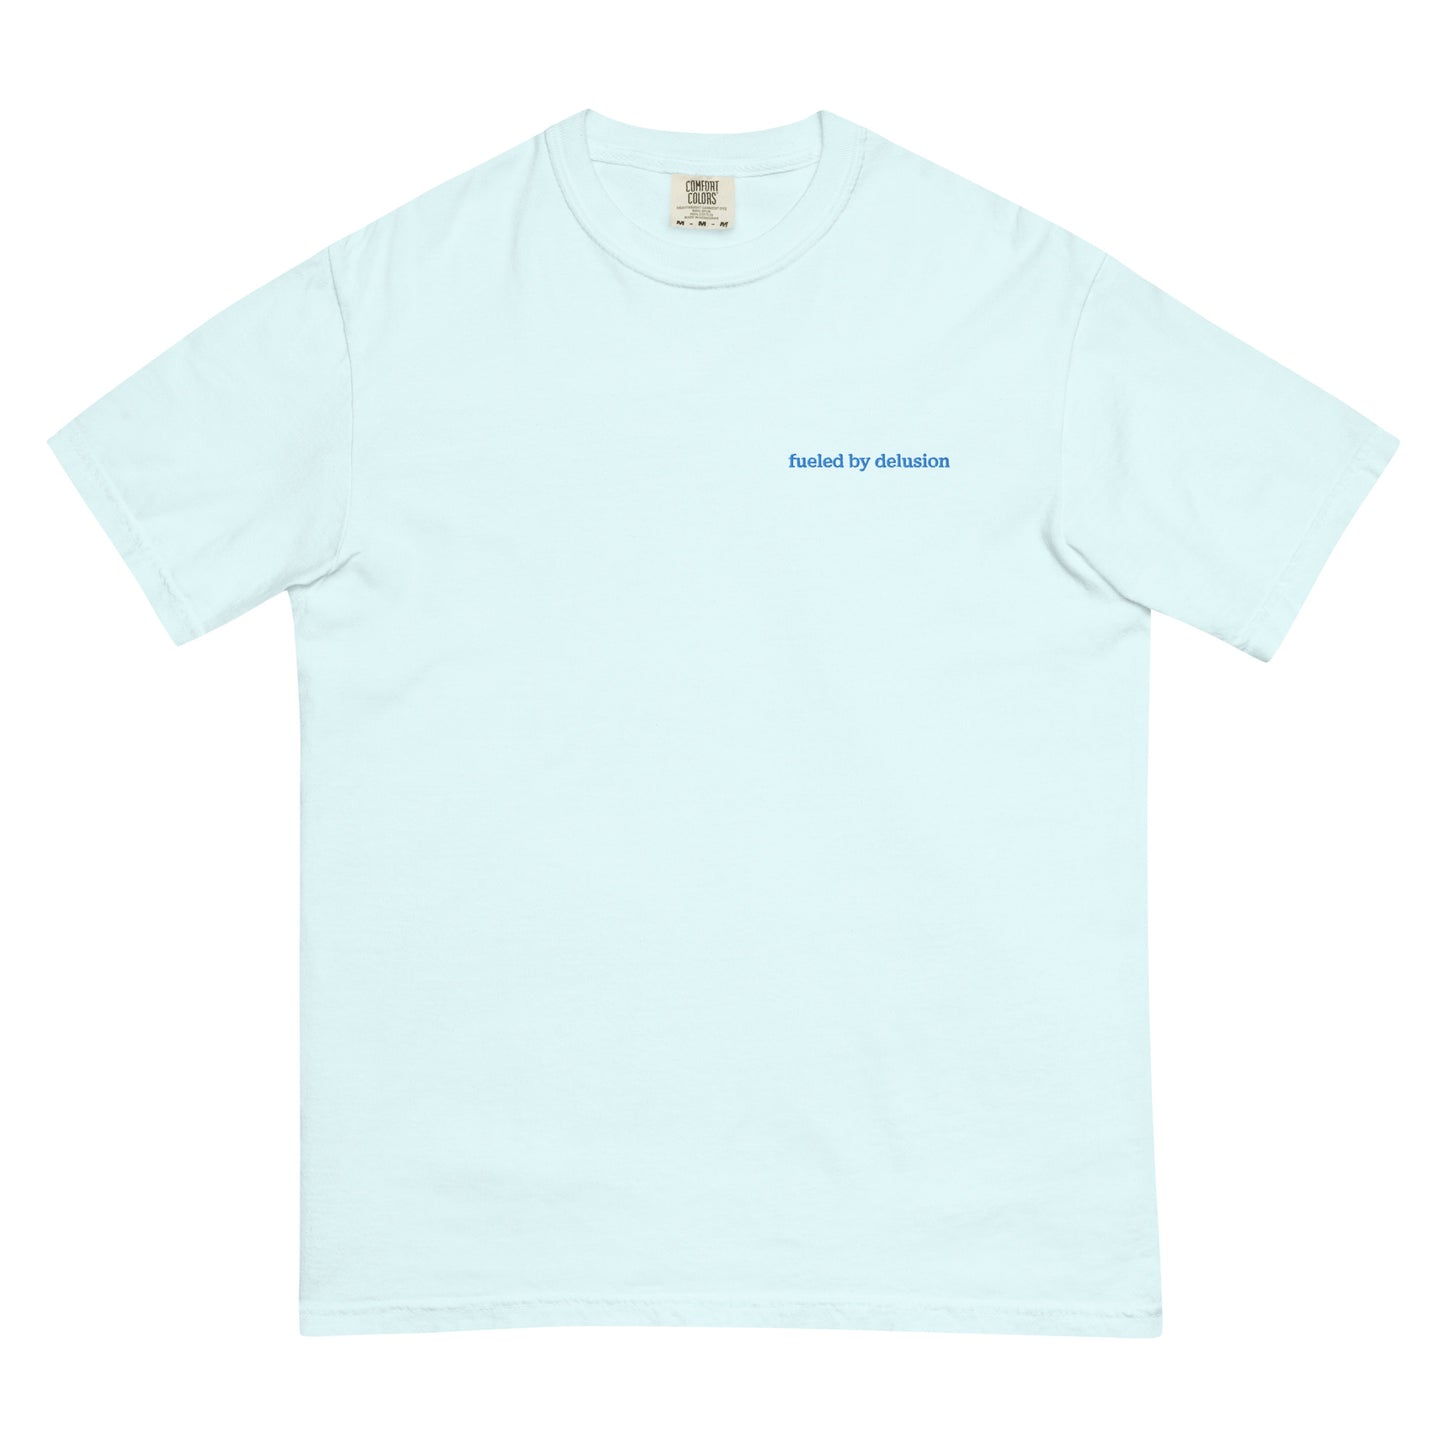 fueled by delusion plain tee